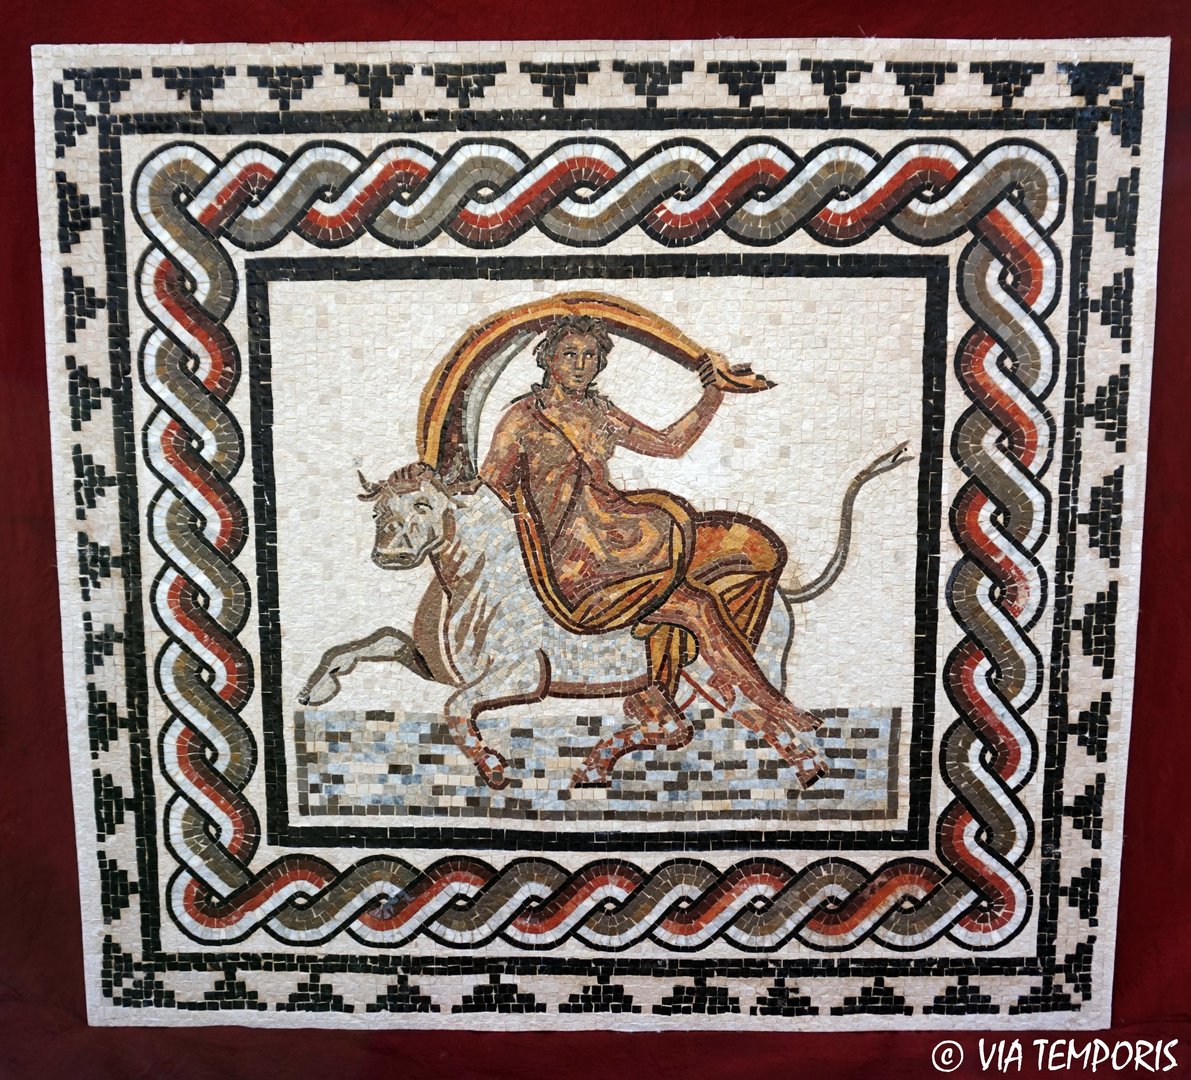 ROMAN MOSAIC - MOSAIC WITH THE ABDUCTION OF EUROPA OF ARLES